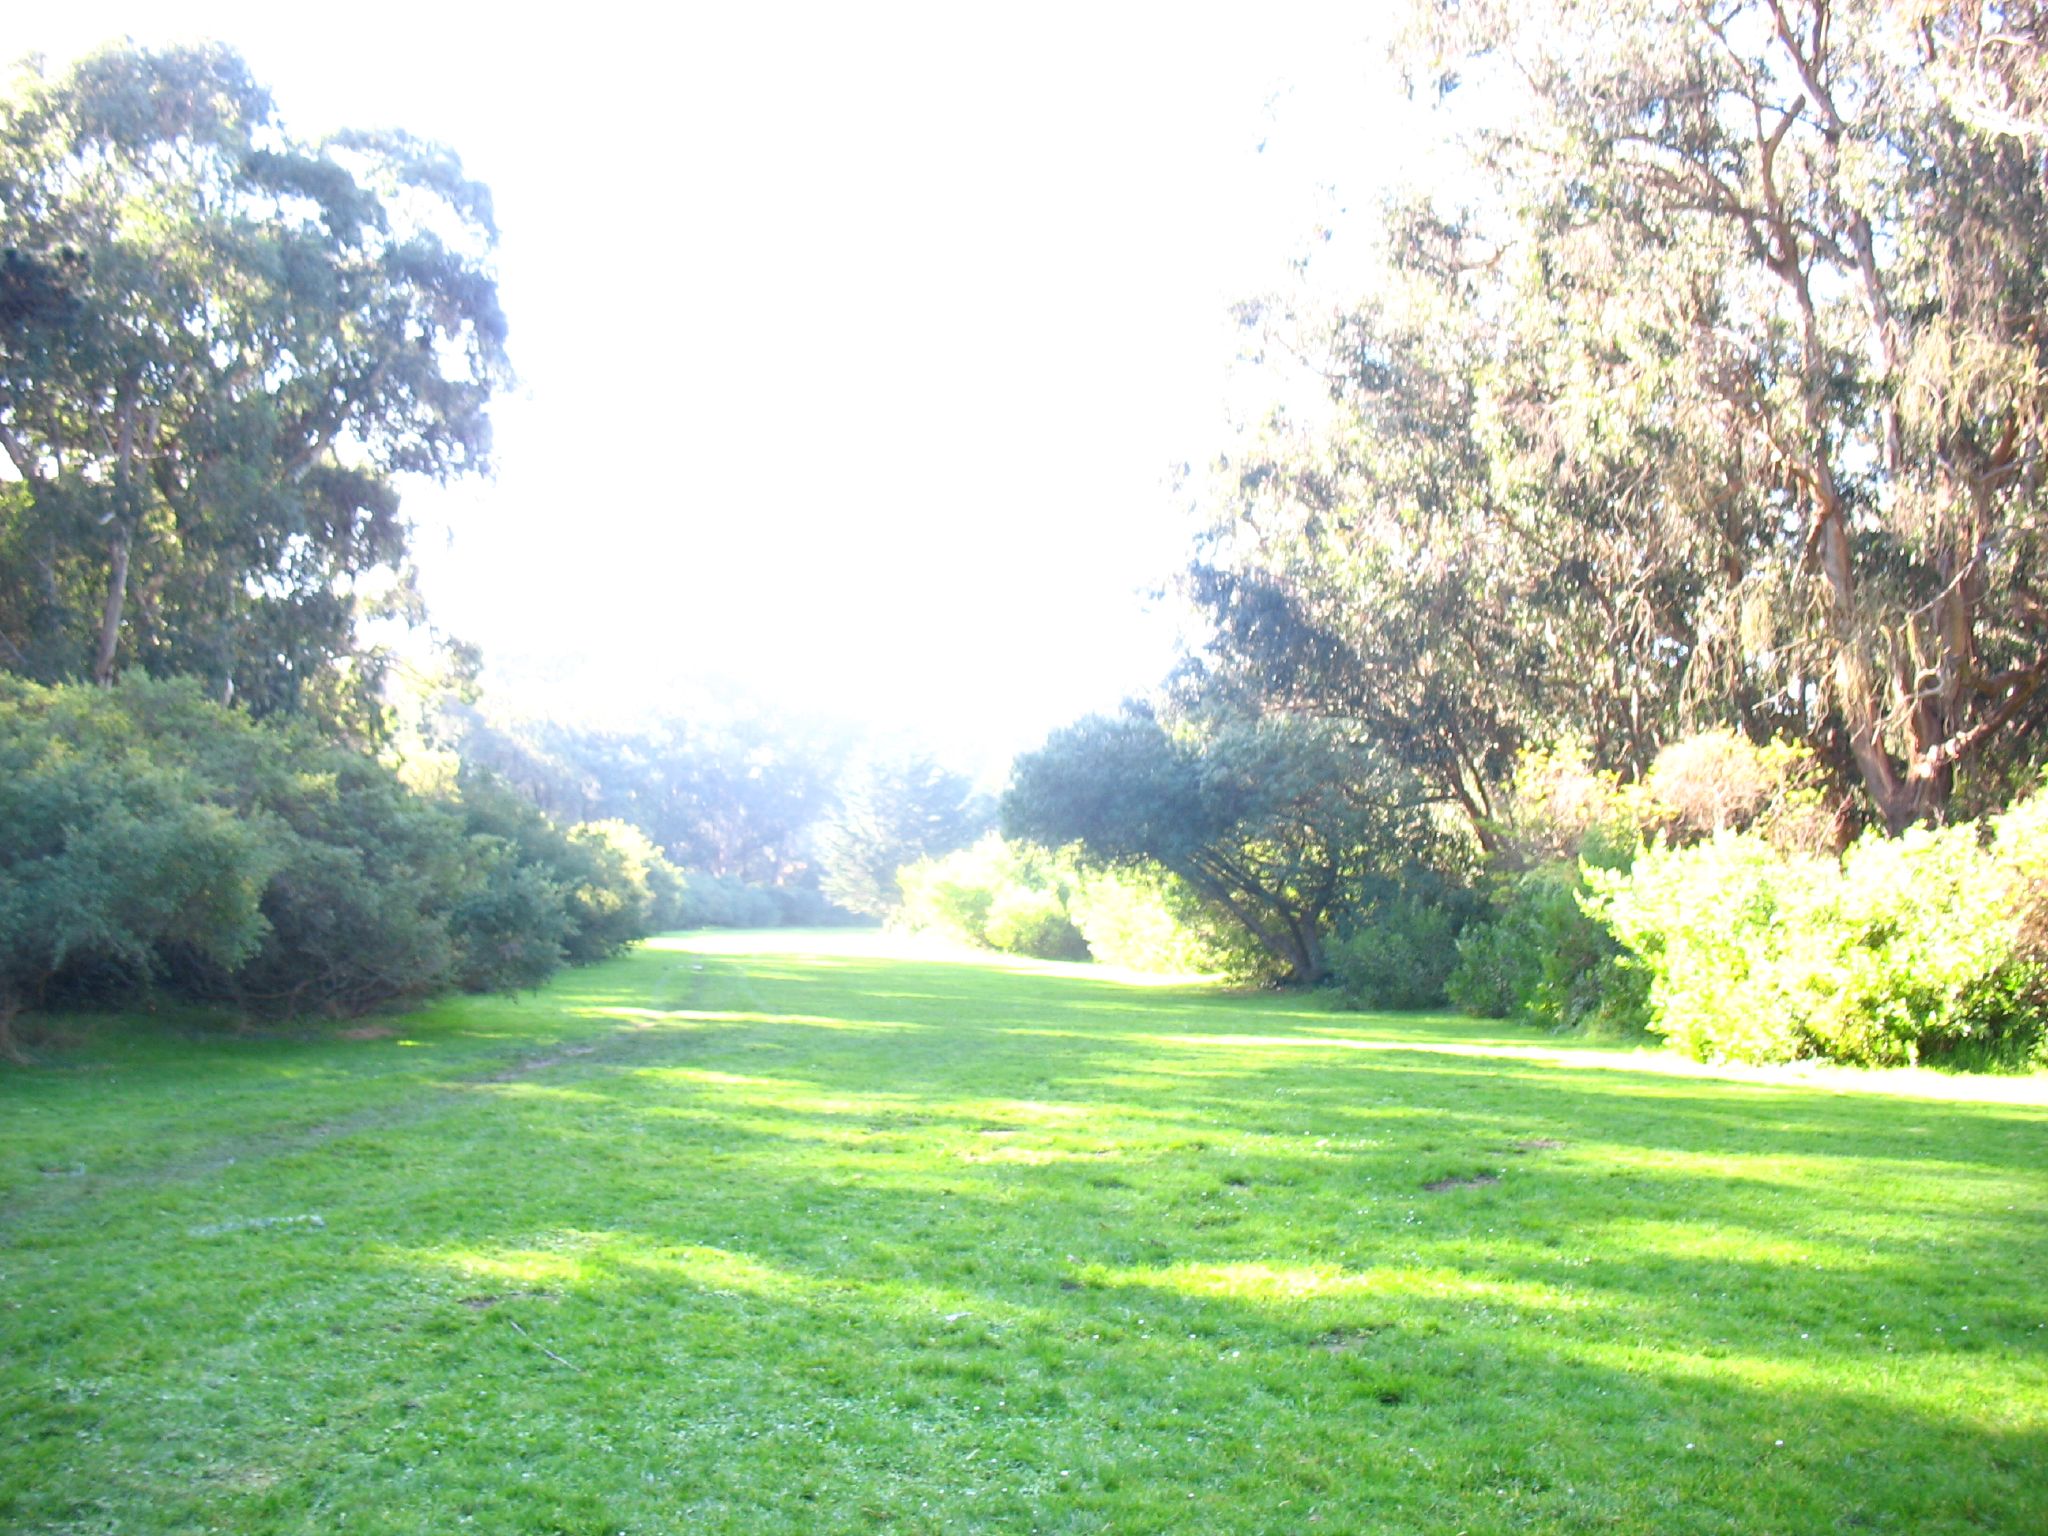 a road through a green wooded area with trees on either side